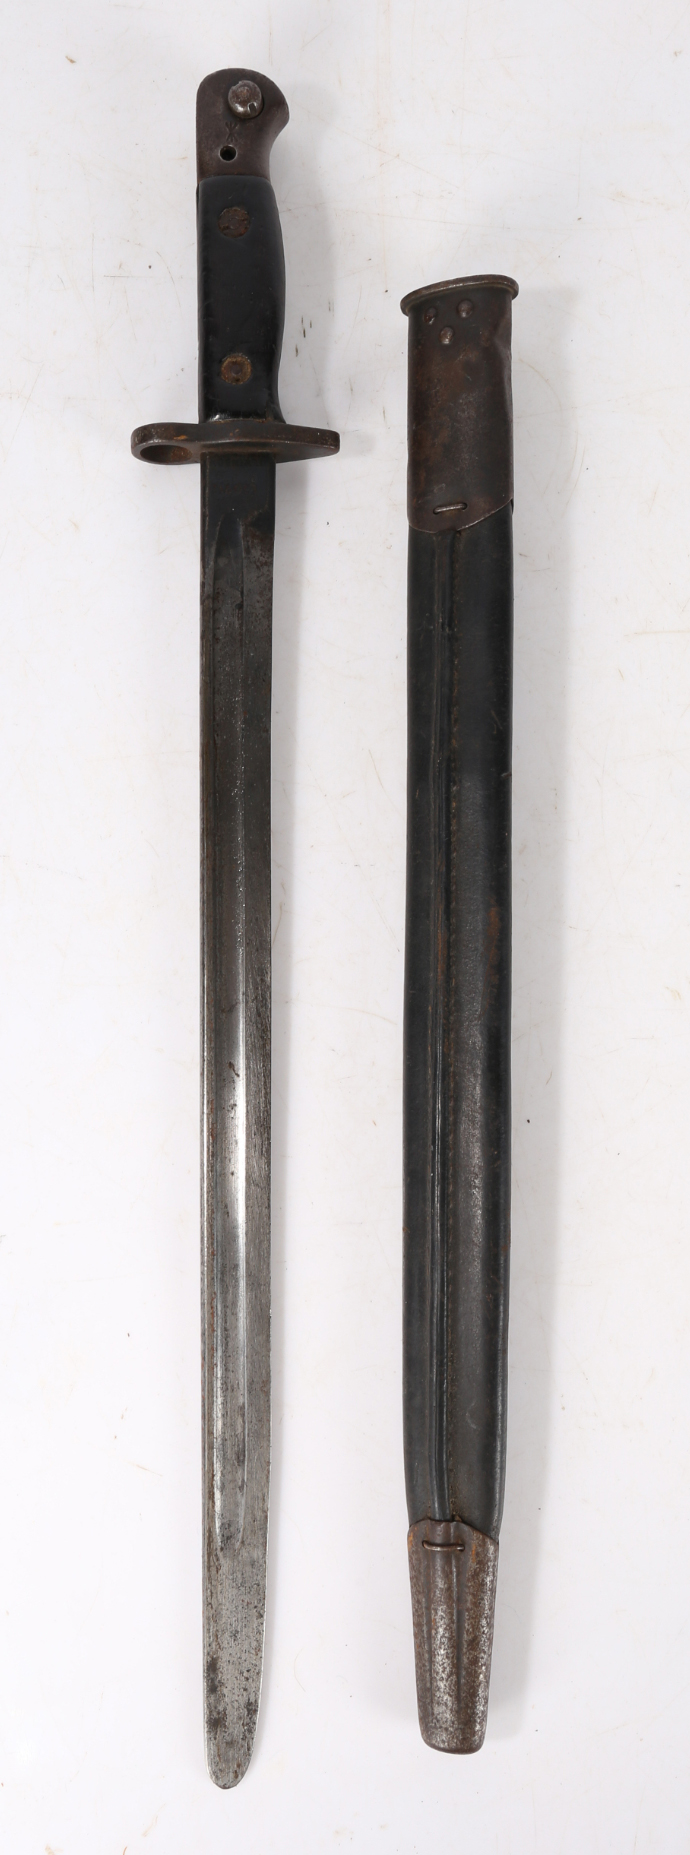 First World War unit marked British 1907 bayonet by Wilkinson, marked on one side of the ricasso